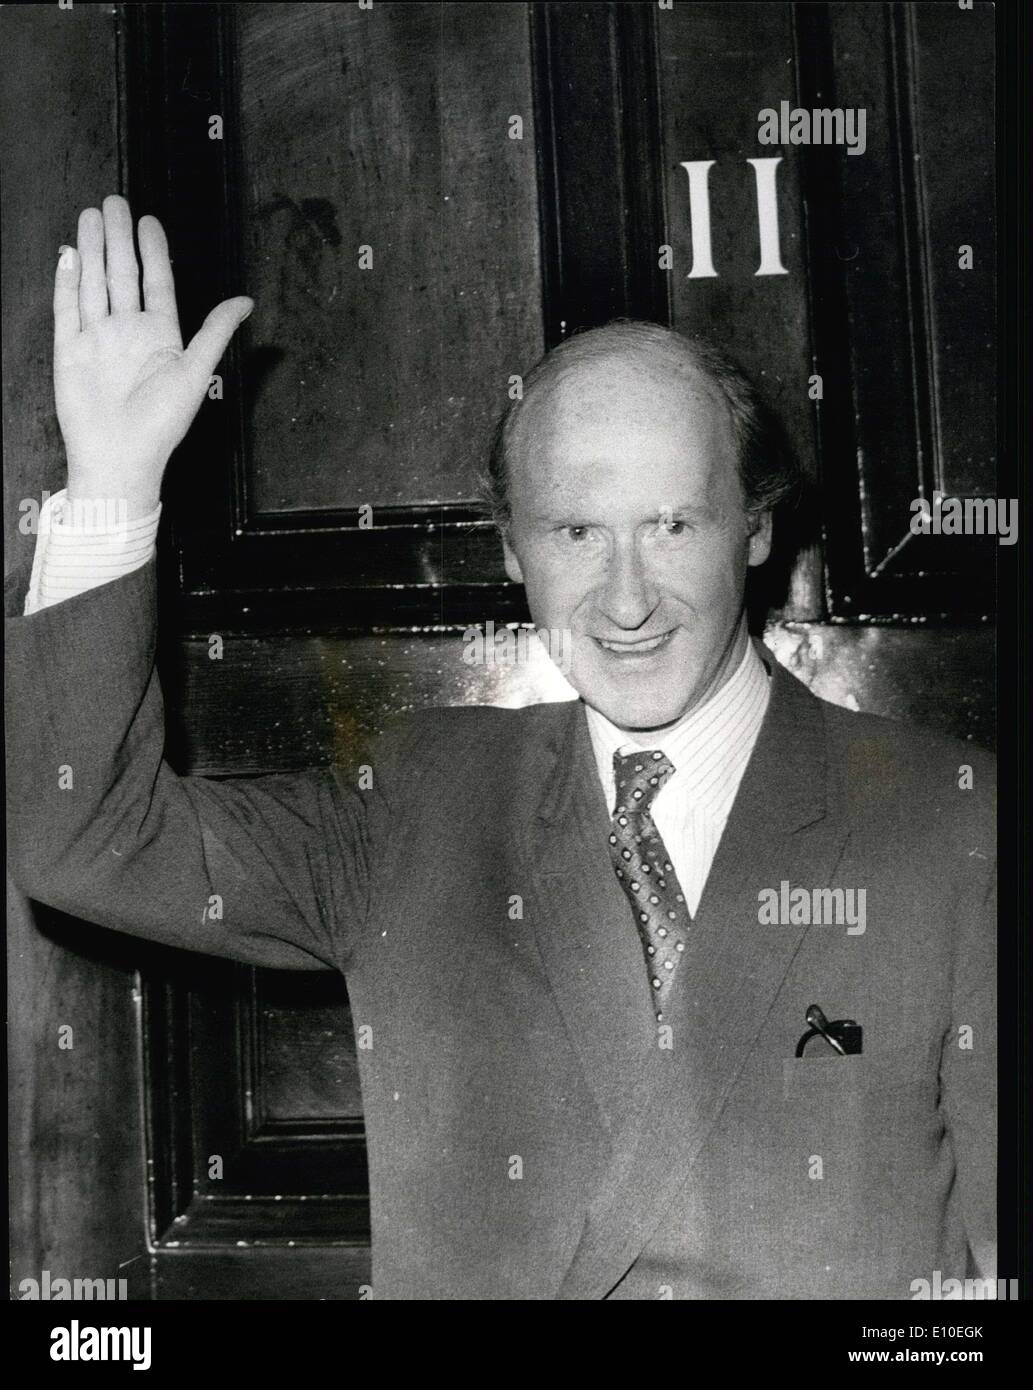 May 11, 1972 - Chancellor Of The Exchequer Leaves For The House: The chancellor of the Exchequer, Mr. Anthony Barber, gives a wave as he left No.11 Downing Street this afternoon for the House of Commons where he was to announce his plans for cuts in Government expenditure. Stock Photo